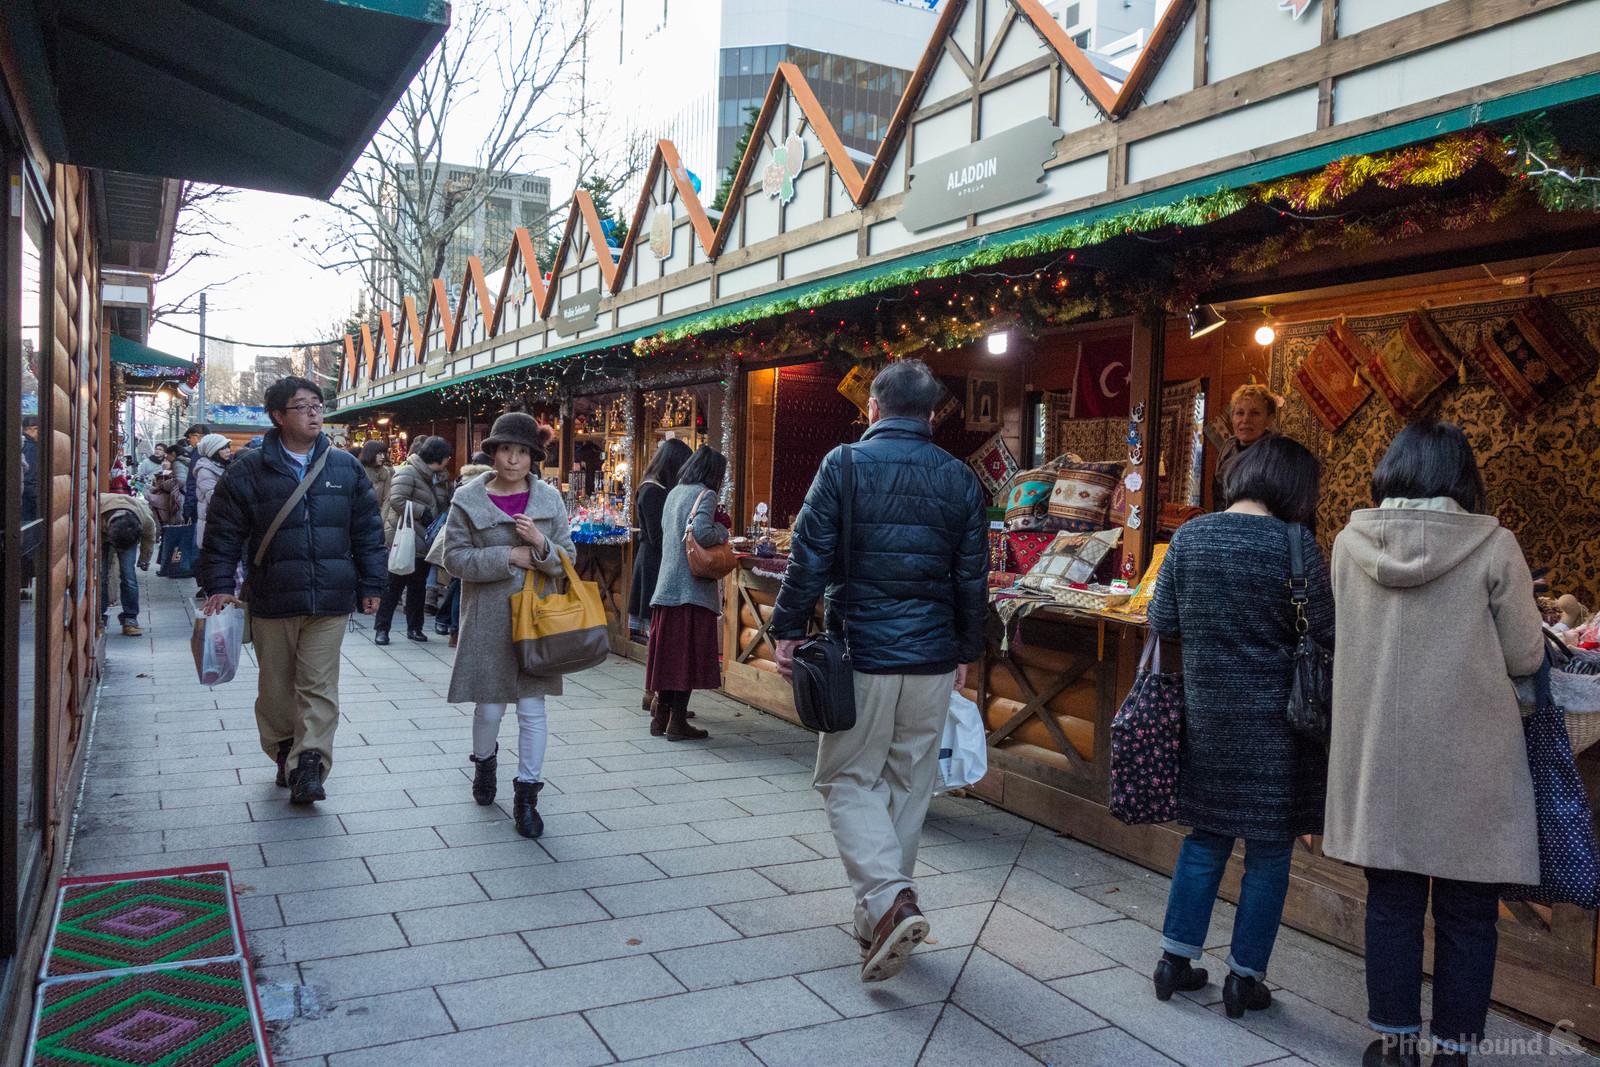 Image of German Christmas Market by Colette English